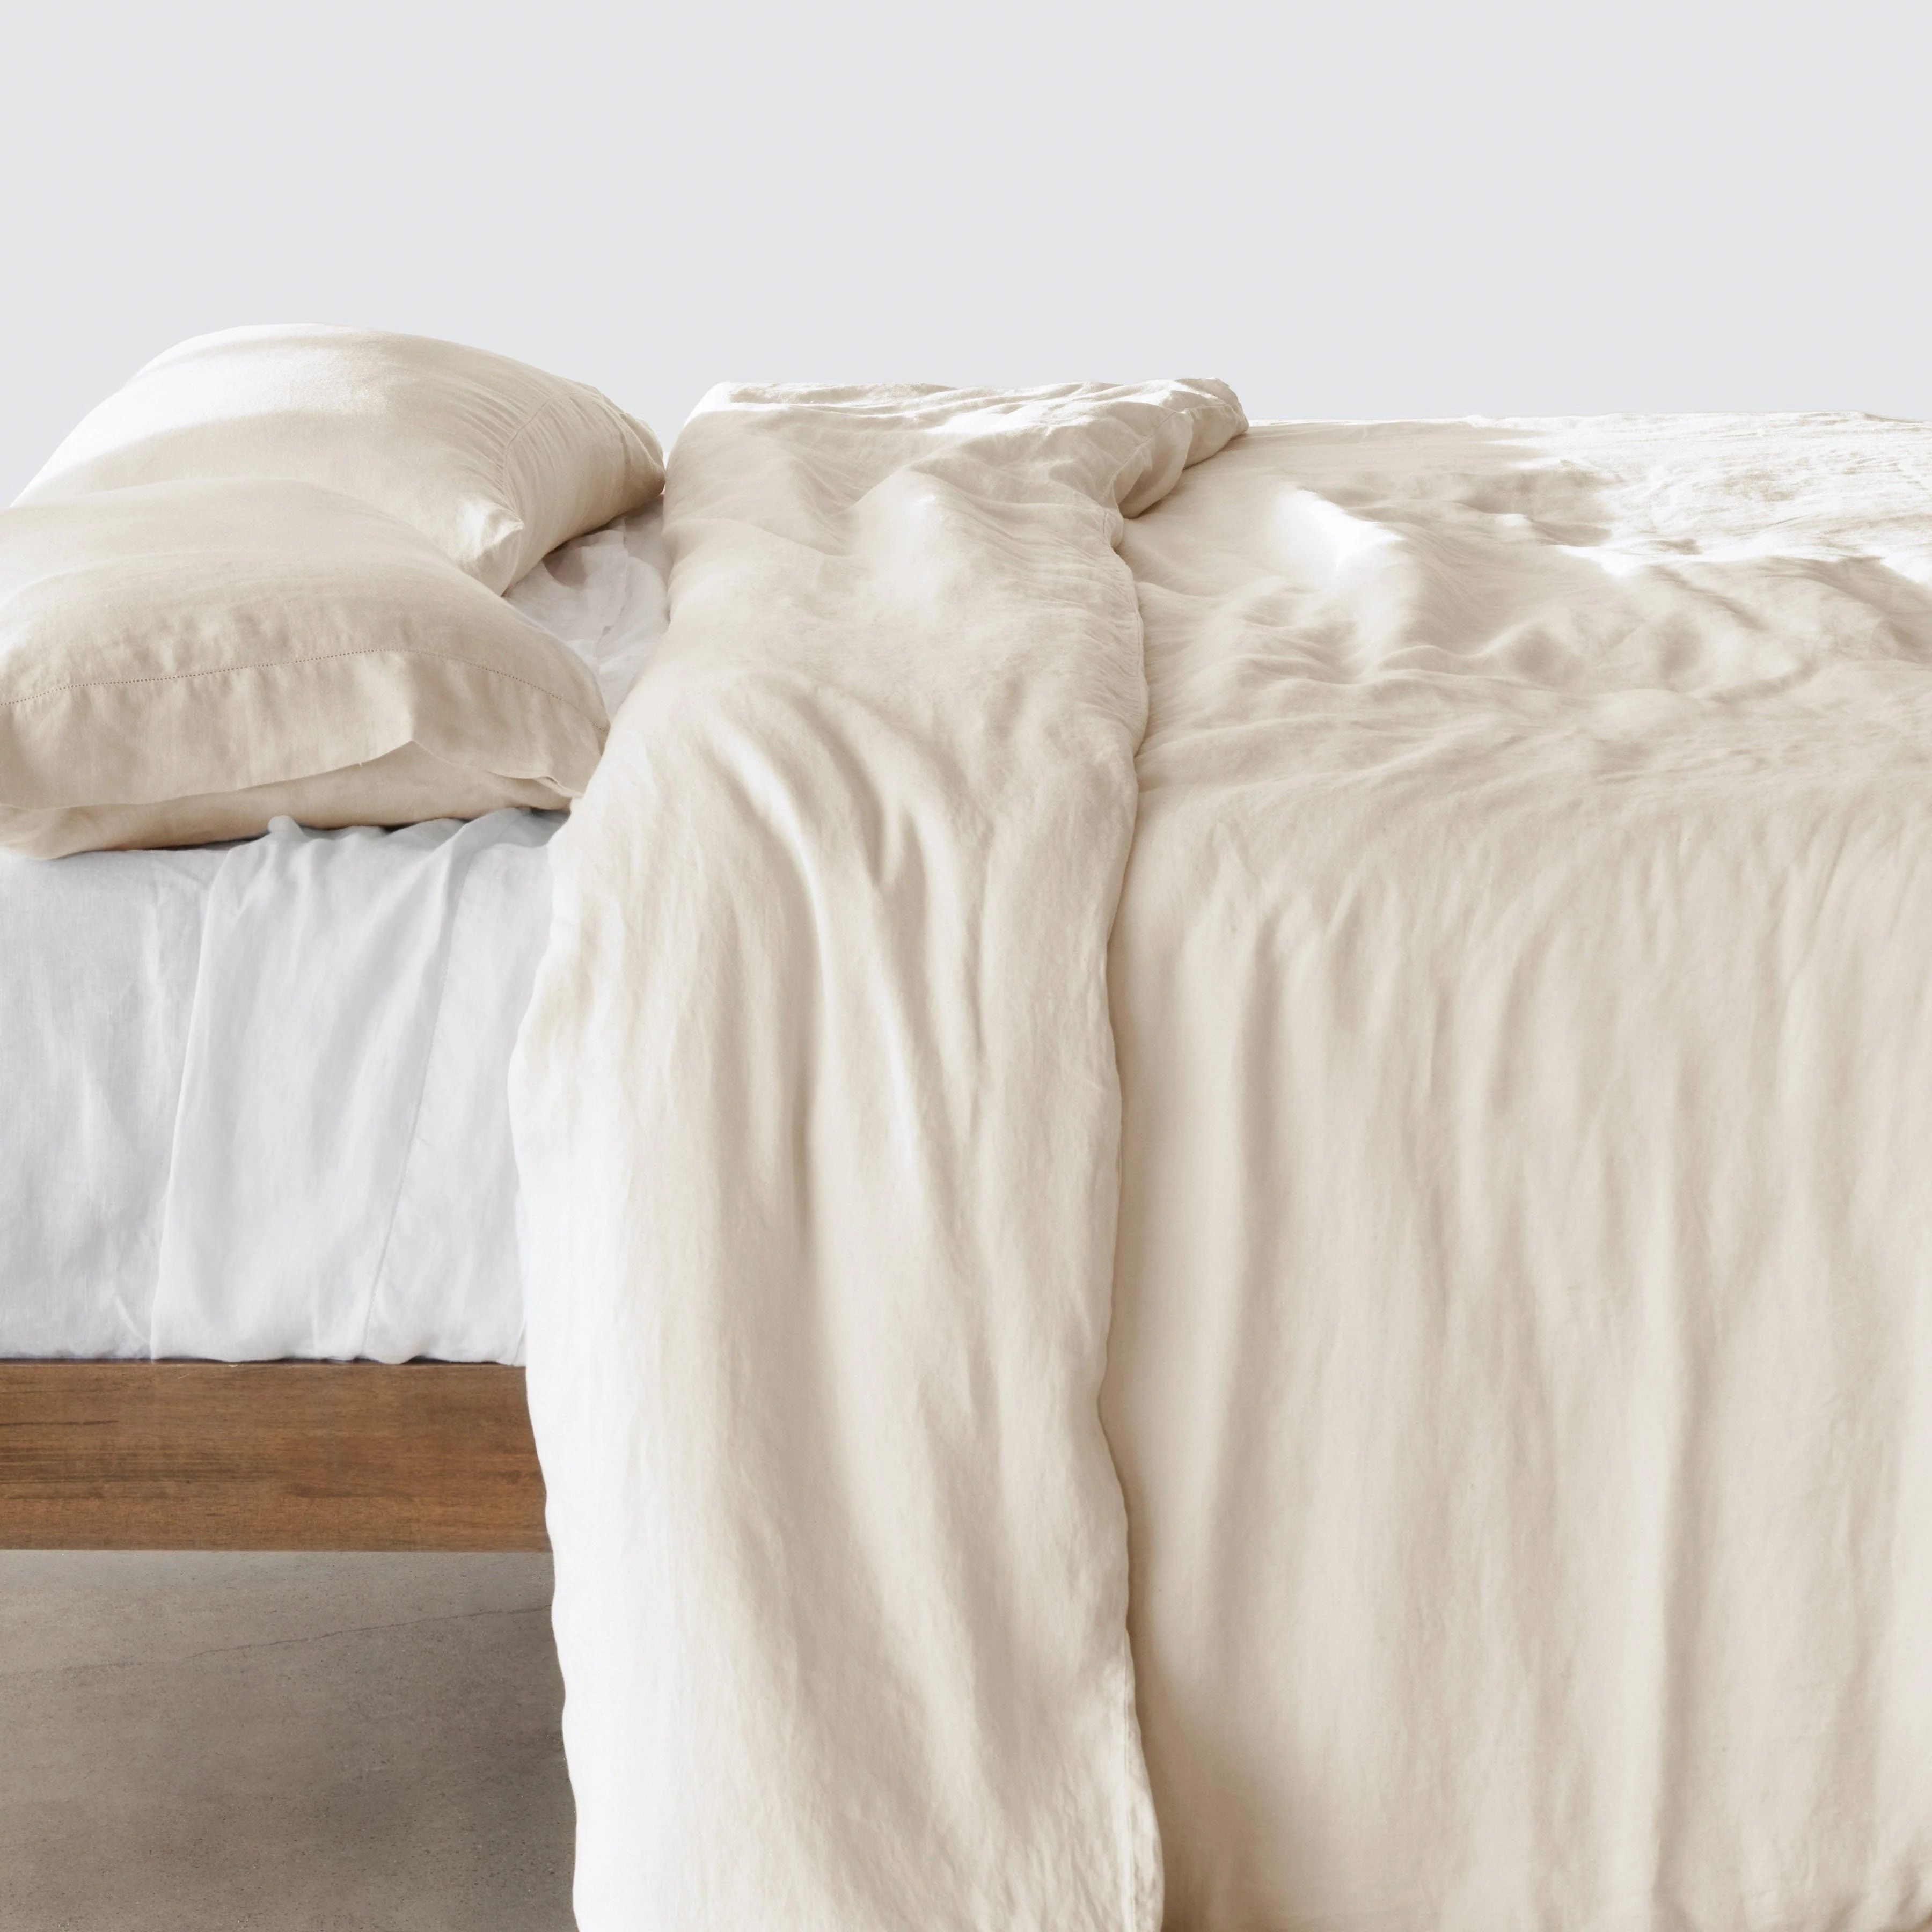 Stonewashed Linen Duvet Cover | The Citizenry